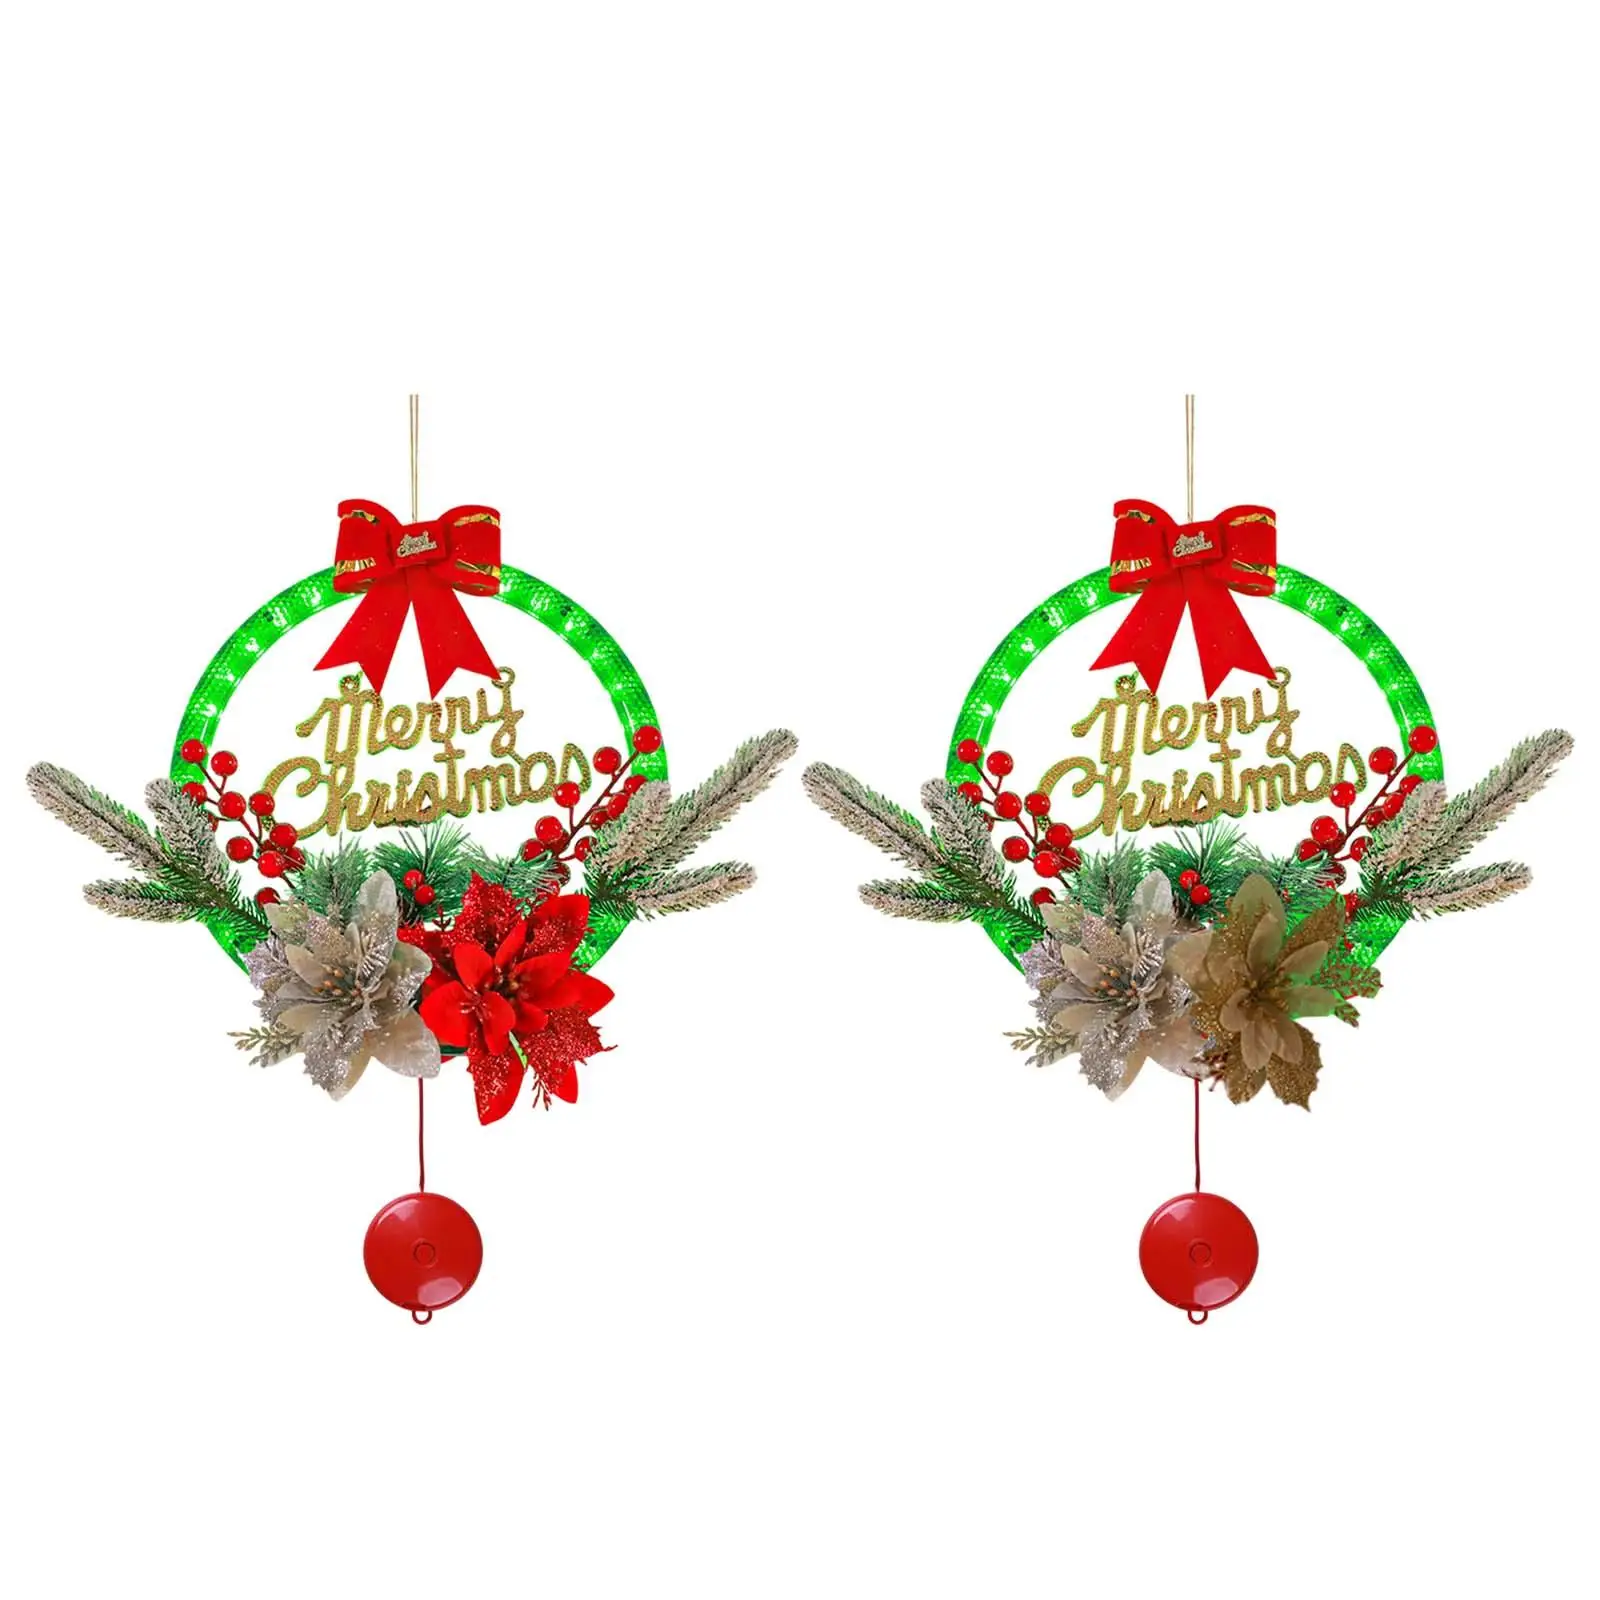 Light up Christmas Wreath Artificial Wreath Christmas Sign Wreath with Lights for Indoor Outdoor Window Porch Wall Decoration